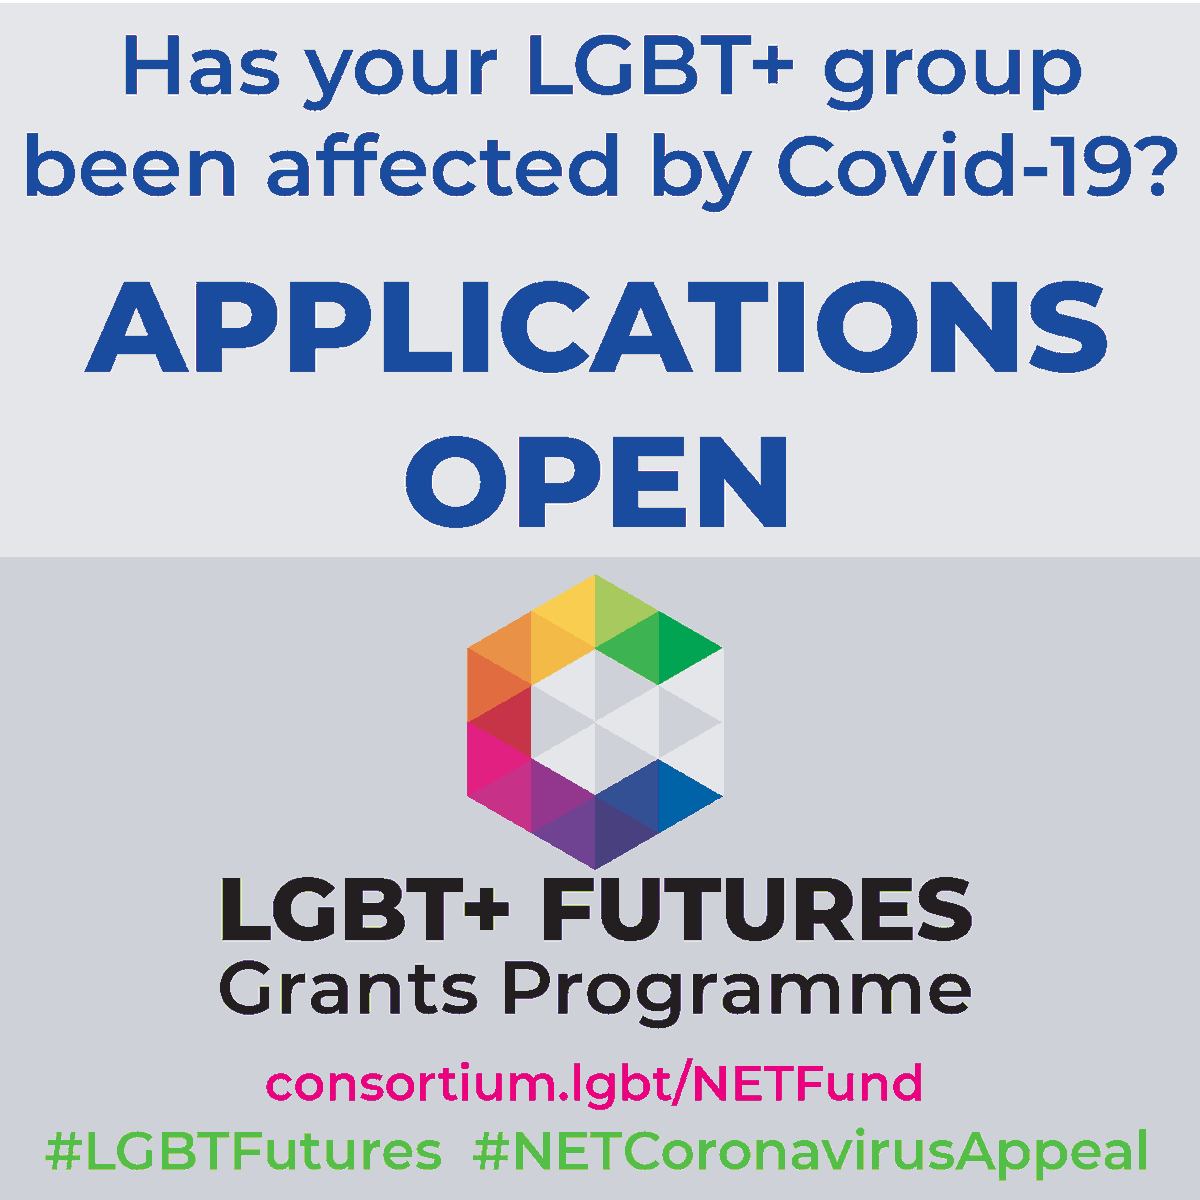 In case you missed it: 📢 We are delighted to announce the launch of our new #LGBTFutures Fund to support #LGBT+ organisations affected by #COVID_19: consortium.lgbt/2020/08/20/lgb…

Thanks to funding from #NETCoronavirusAppeal, £350K is available to LGBT+ organisations across the UK🪙💷